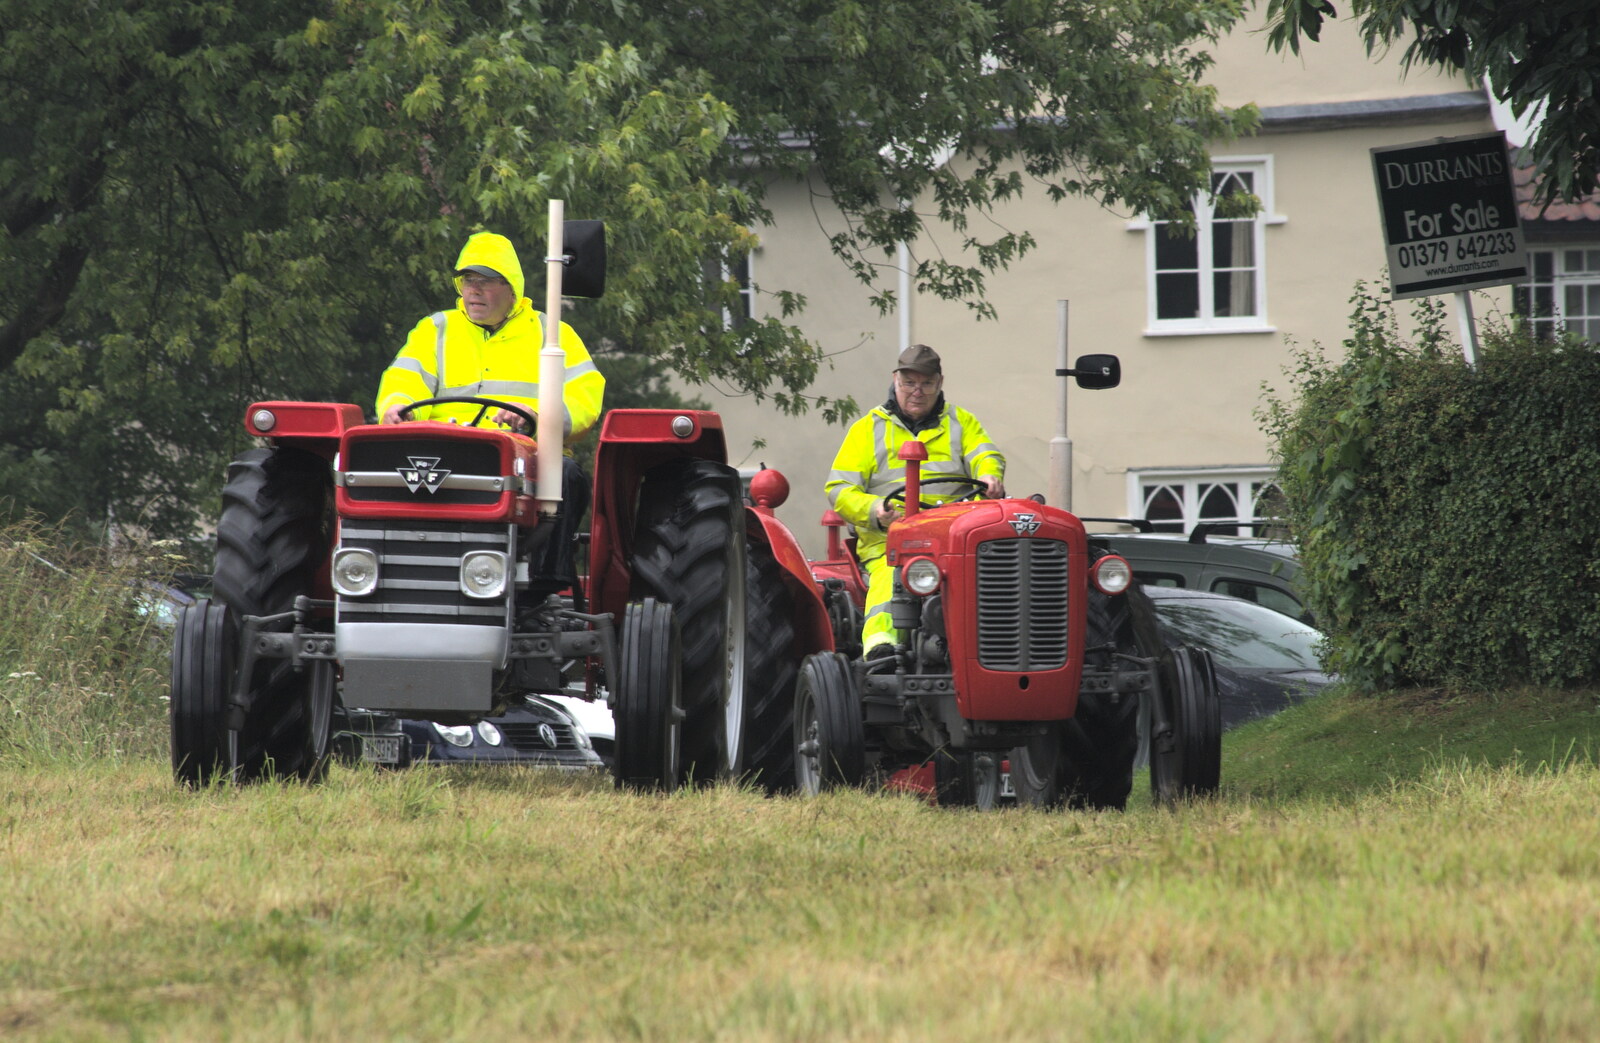 The first of the vintage tractors arrives from Thrandeston Pig, Little Green, Thrandeston, Suffolk - 29th June 2014